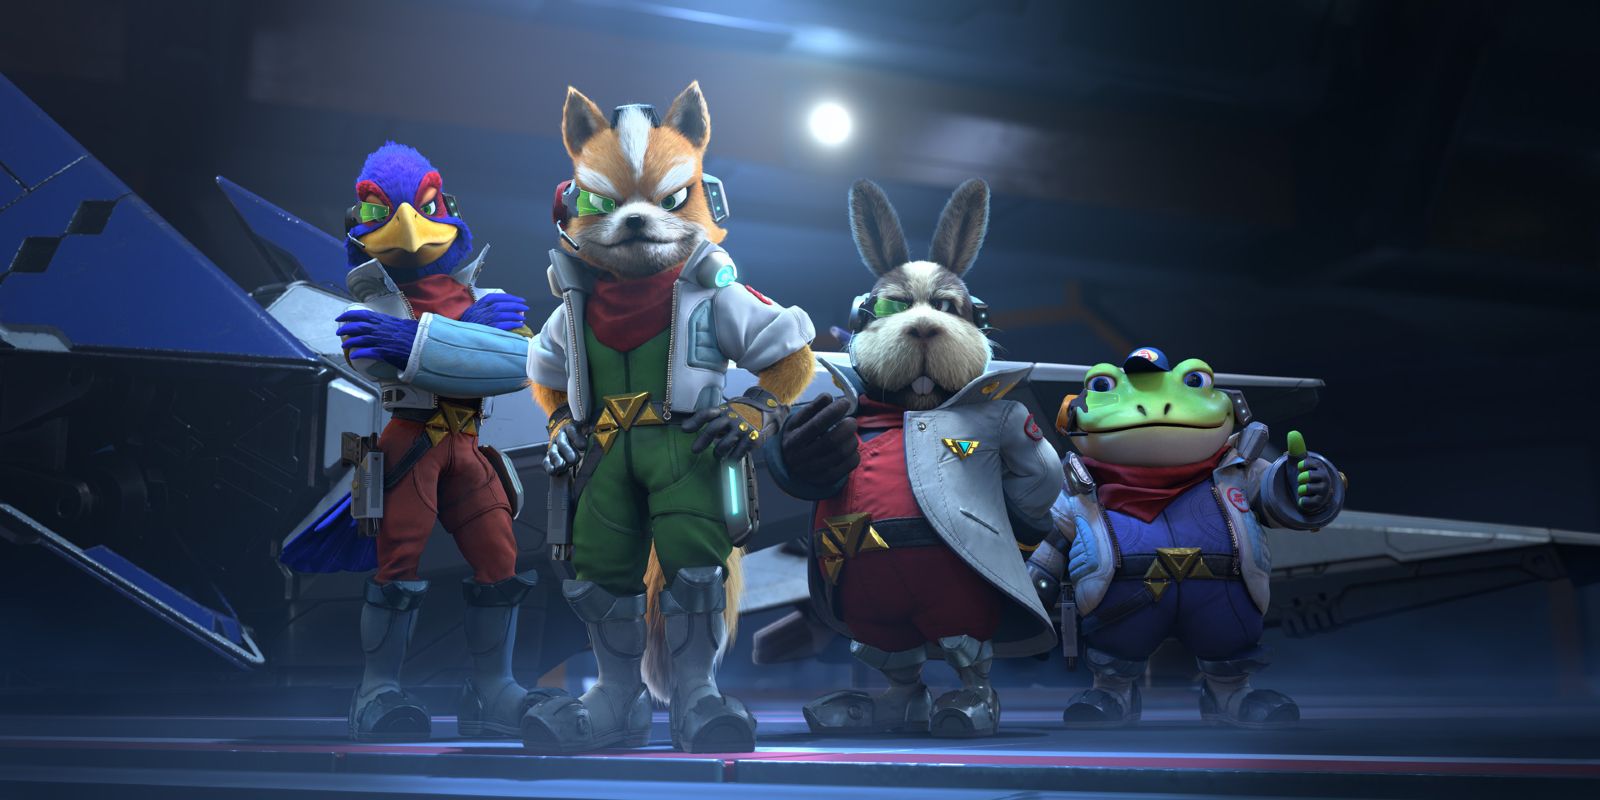 Star Fox team together in the Starlink Battle For Atlas trailer